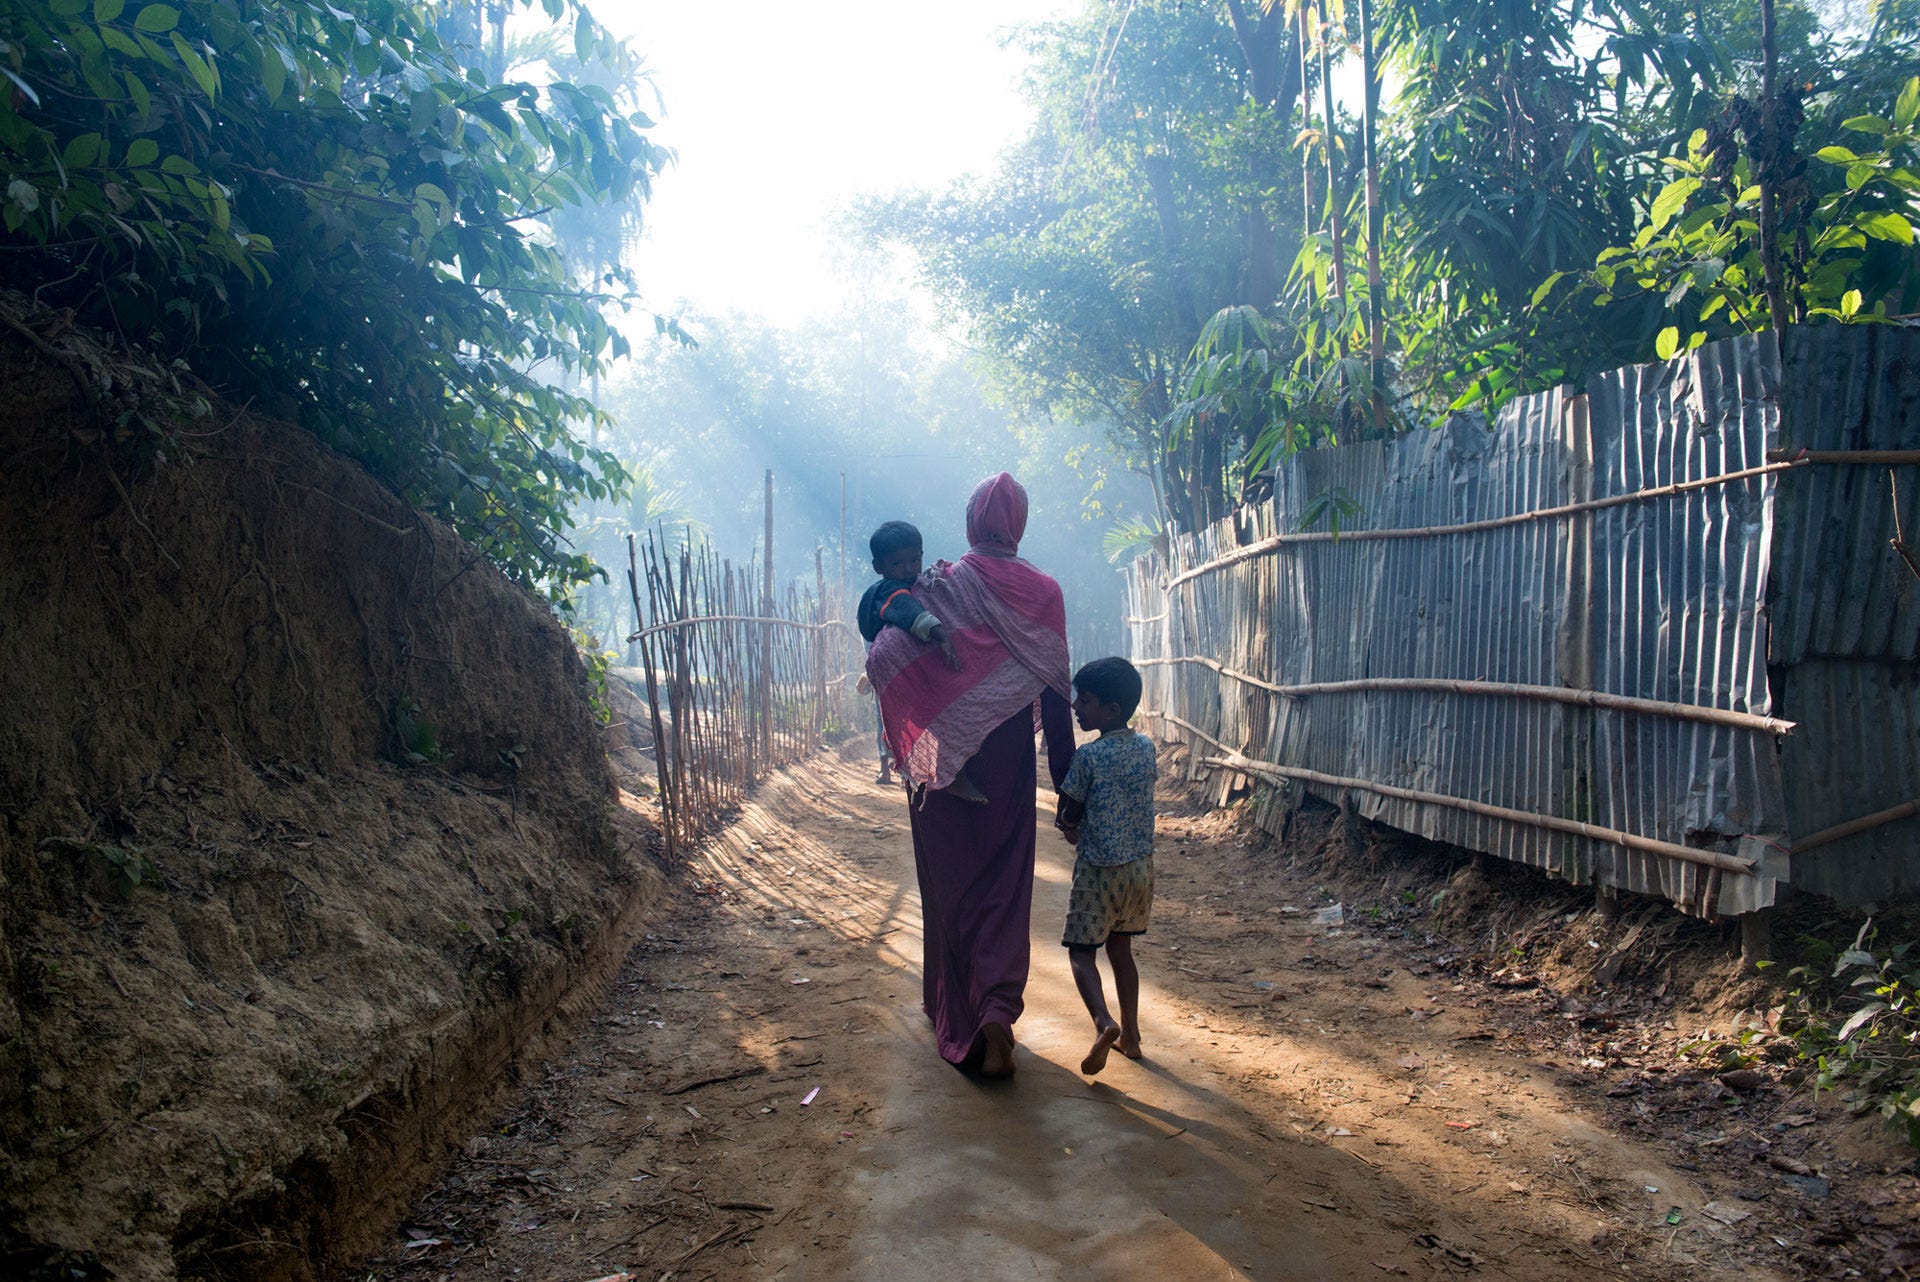 Life as a Rohingya in Coxs Bazar, Bangladesh by BRAC Medium picture image